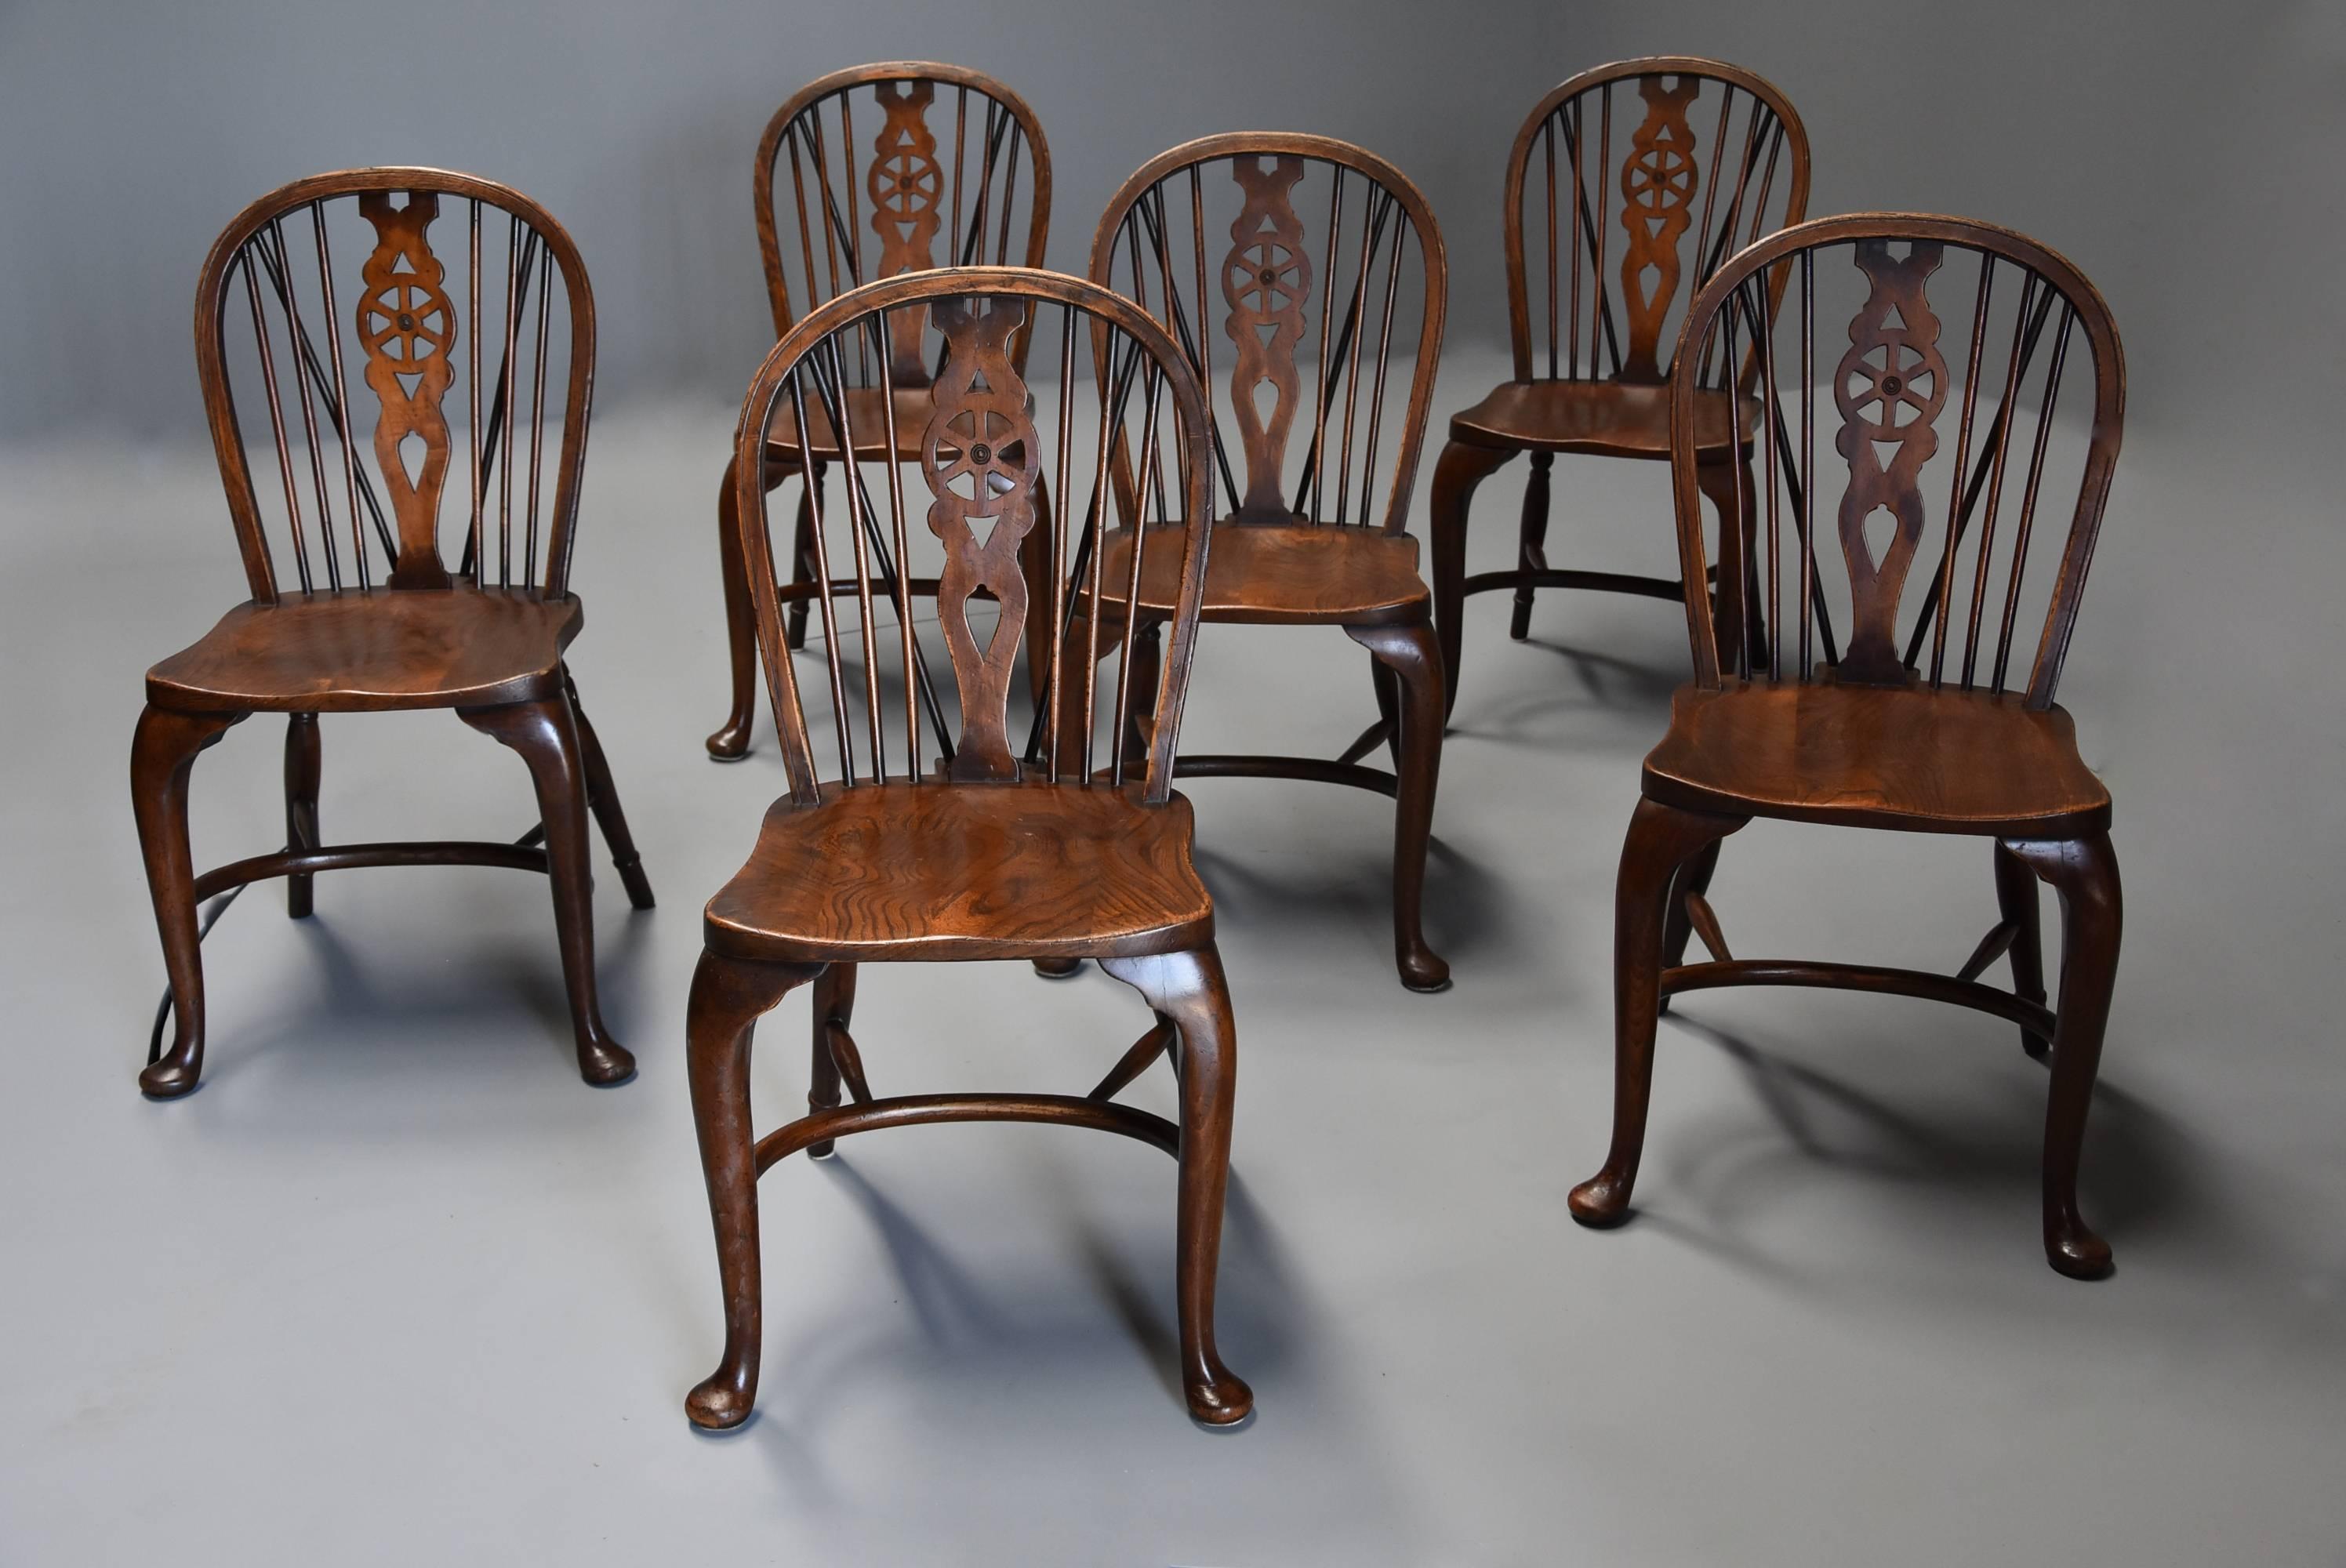 A superb set of six ash and beech wheelback Windsor chairs with cabriole leg with good patina (colour), stamped 'AP'.

This set of chairs consist of a low hoop-back with central pierced splat with wheel design and turned spindles to either side